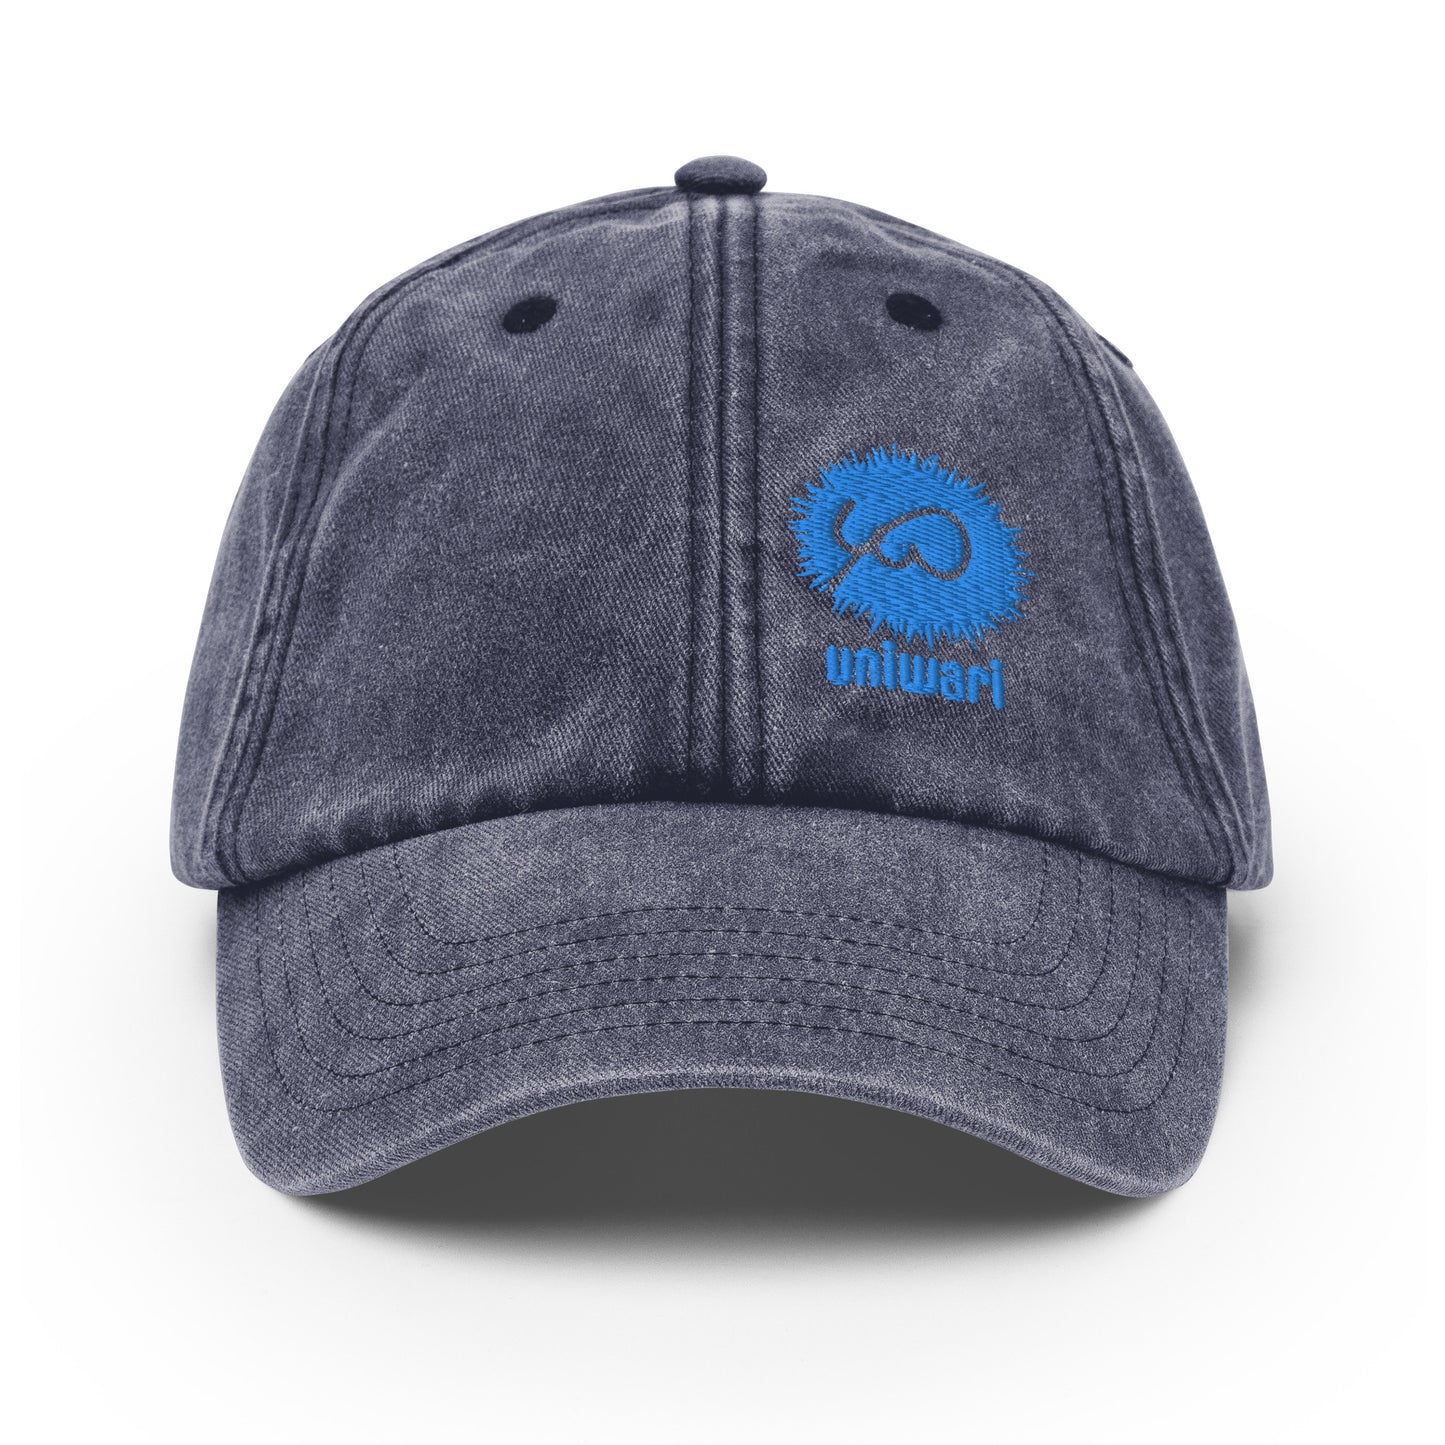 Drak Blue Cap- Front Design with an Blue Embroidery of Uniwari Logo